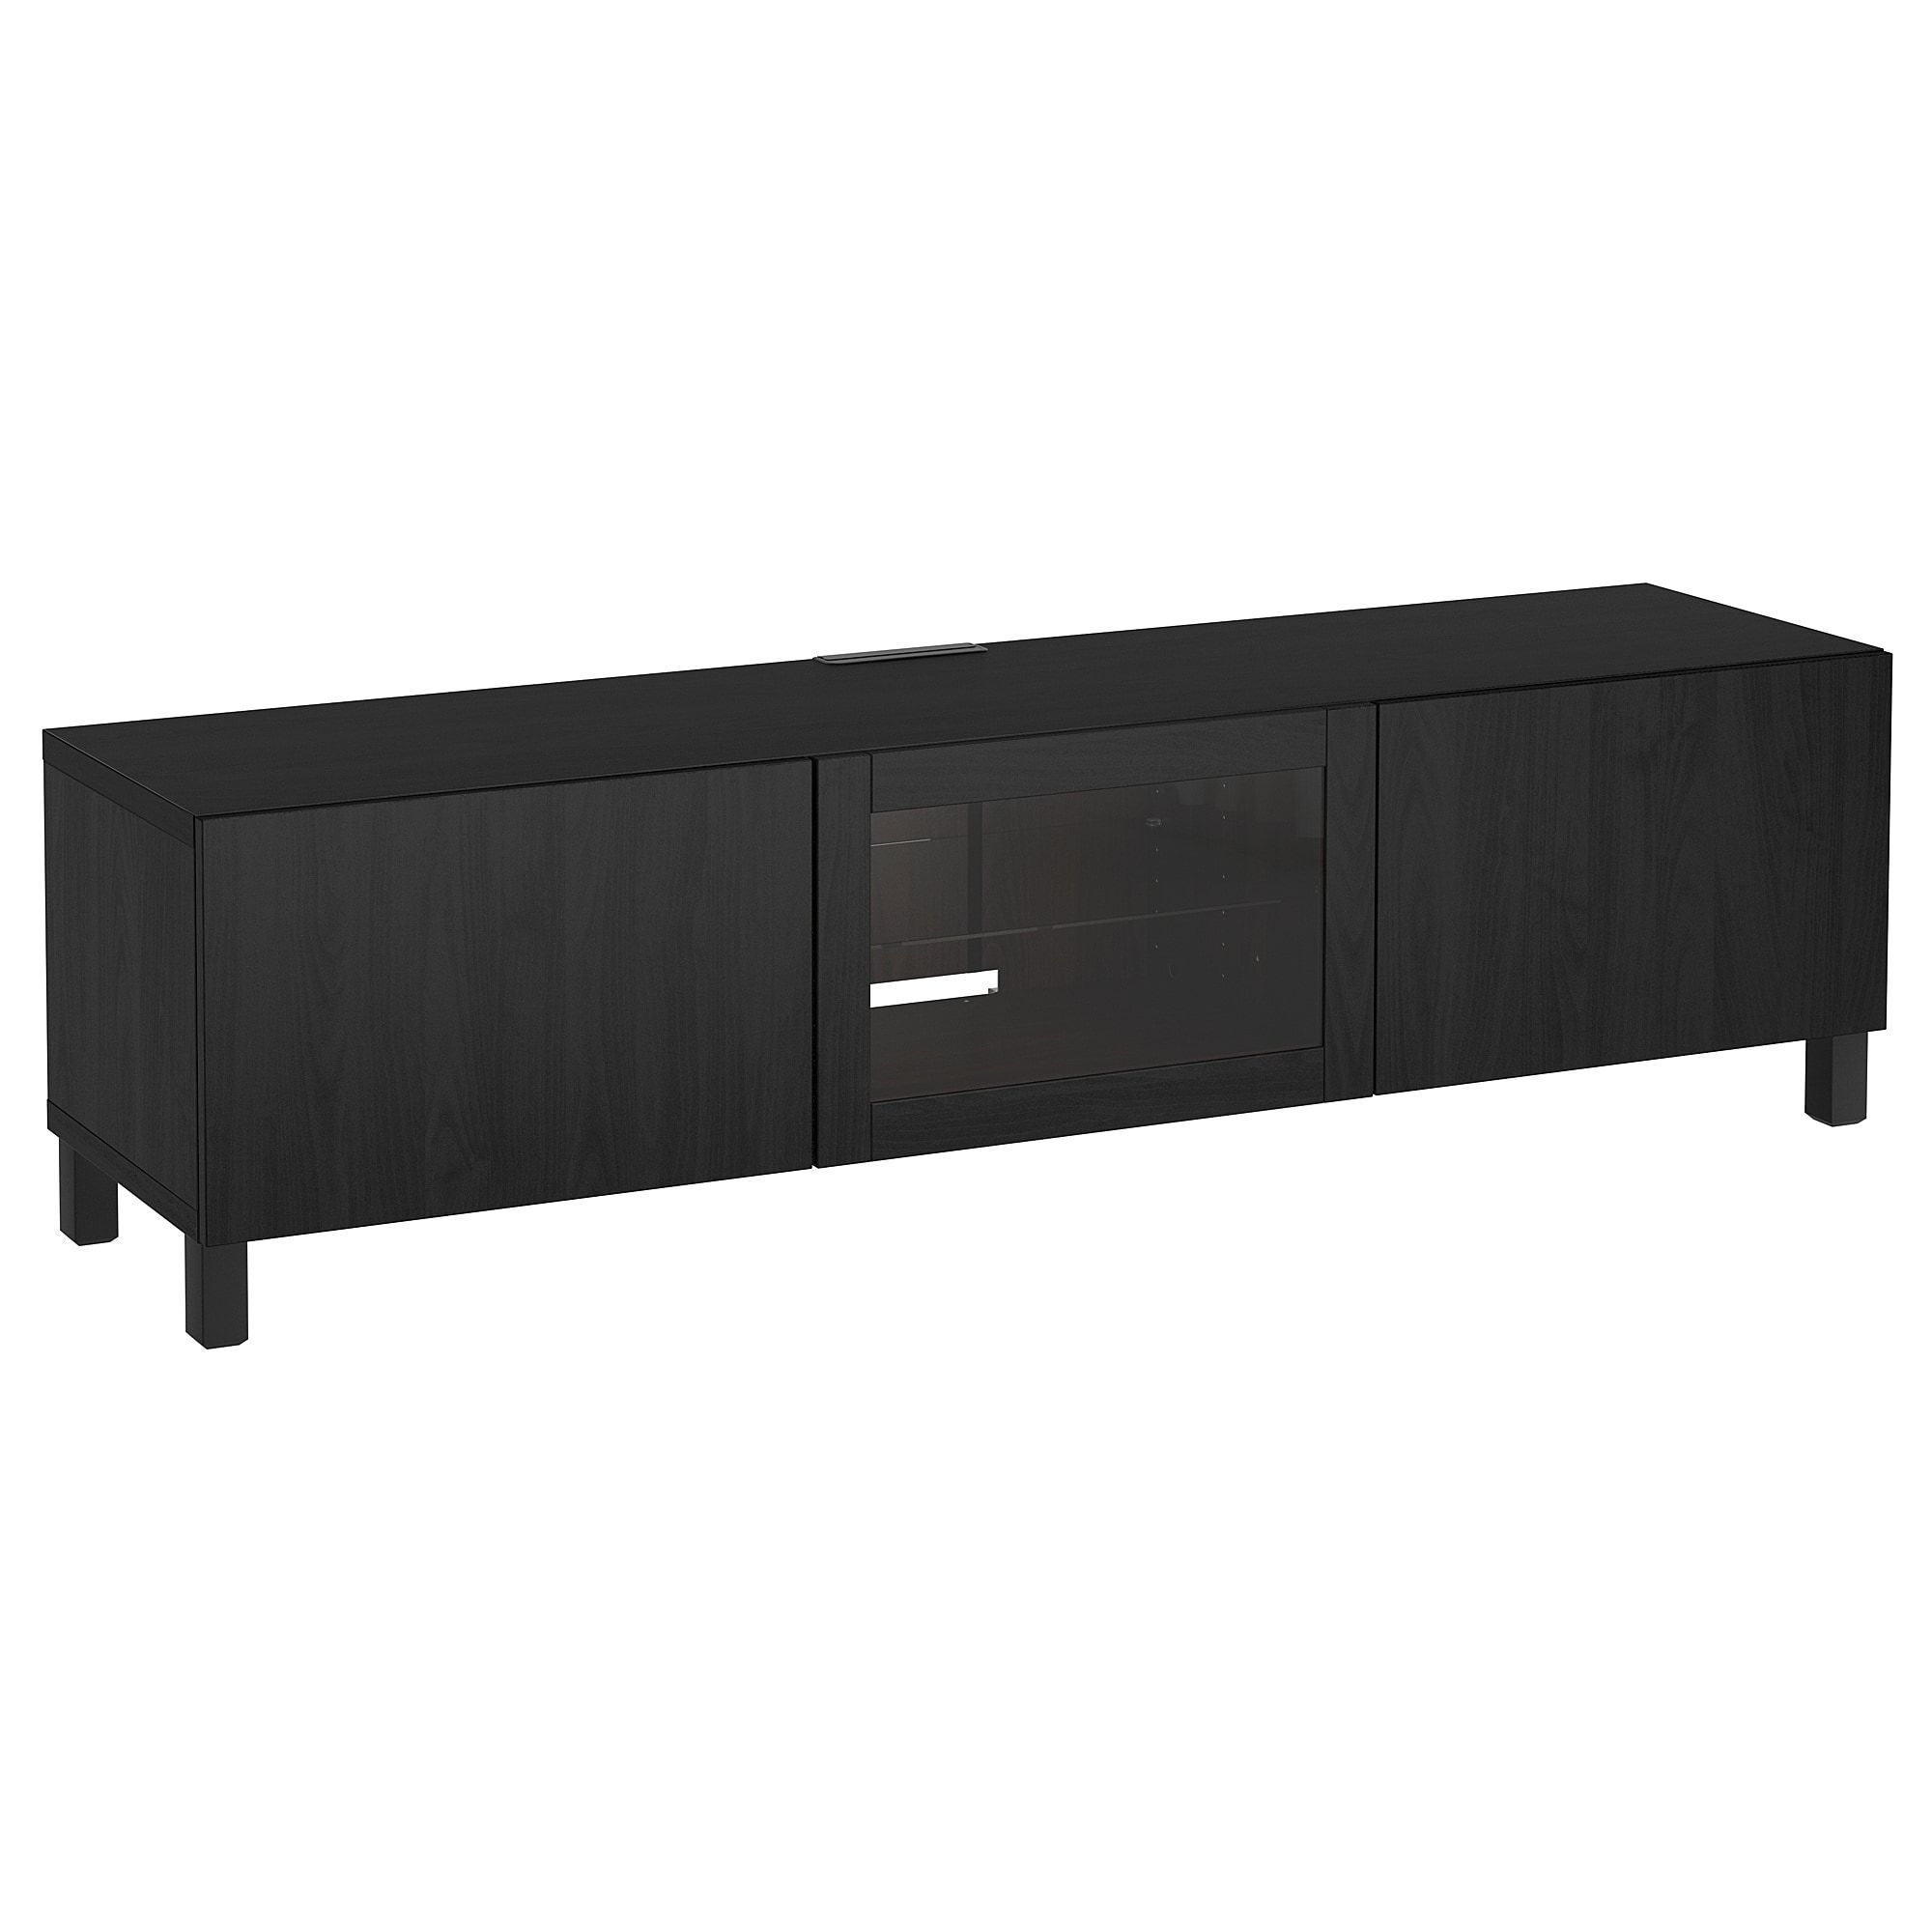 Black Tv Cabinets With Drawers With Widely Used Bestå Tv Unit With Drawers And Door – Lappviken Black Brown Clear (Photo 4 of 20)